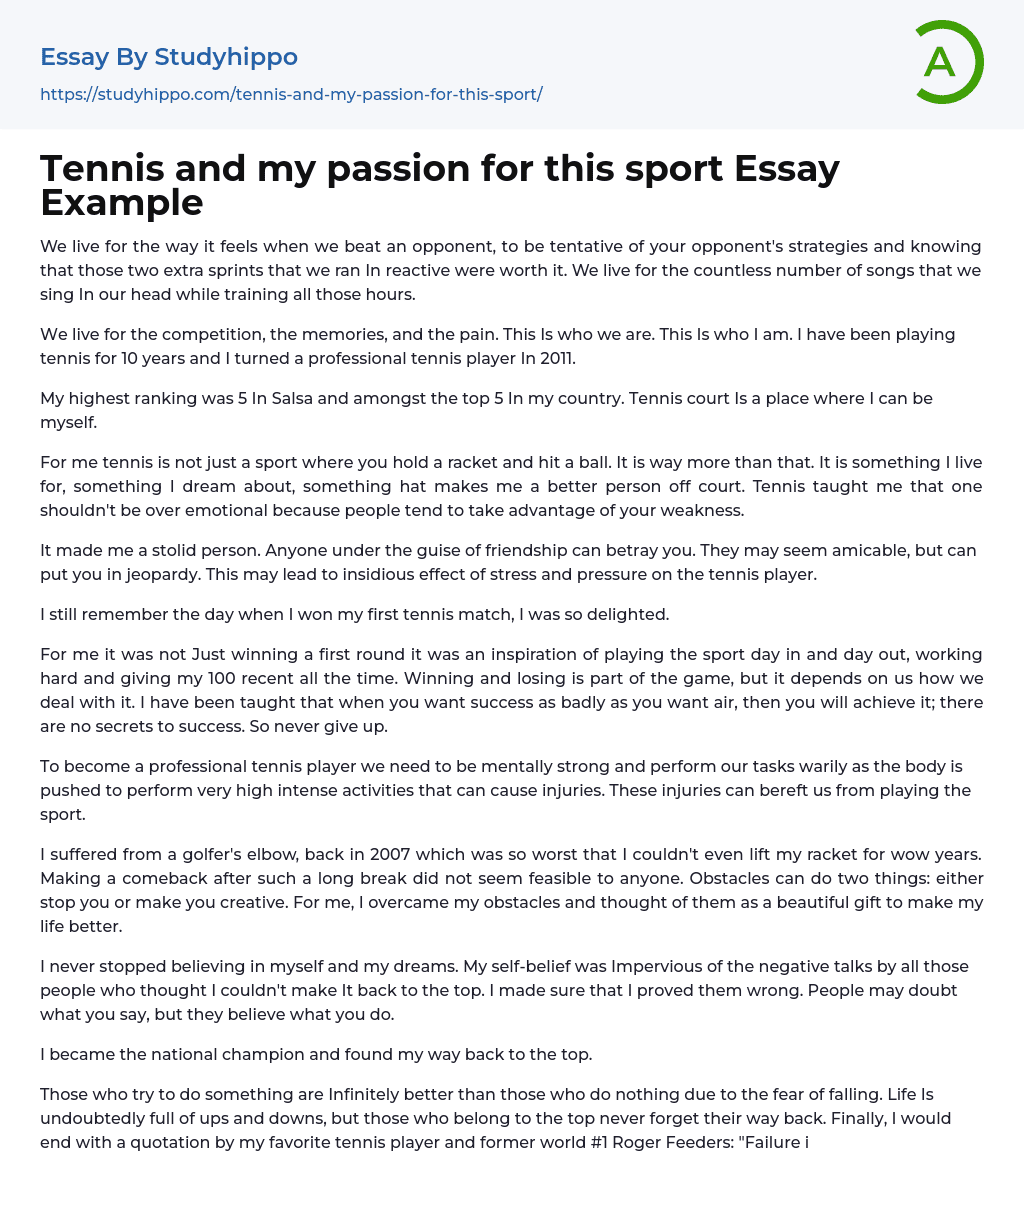 Tennis and my passion for this sport Essay Example